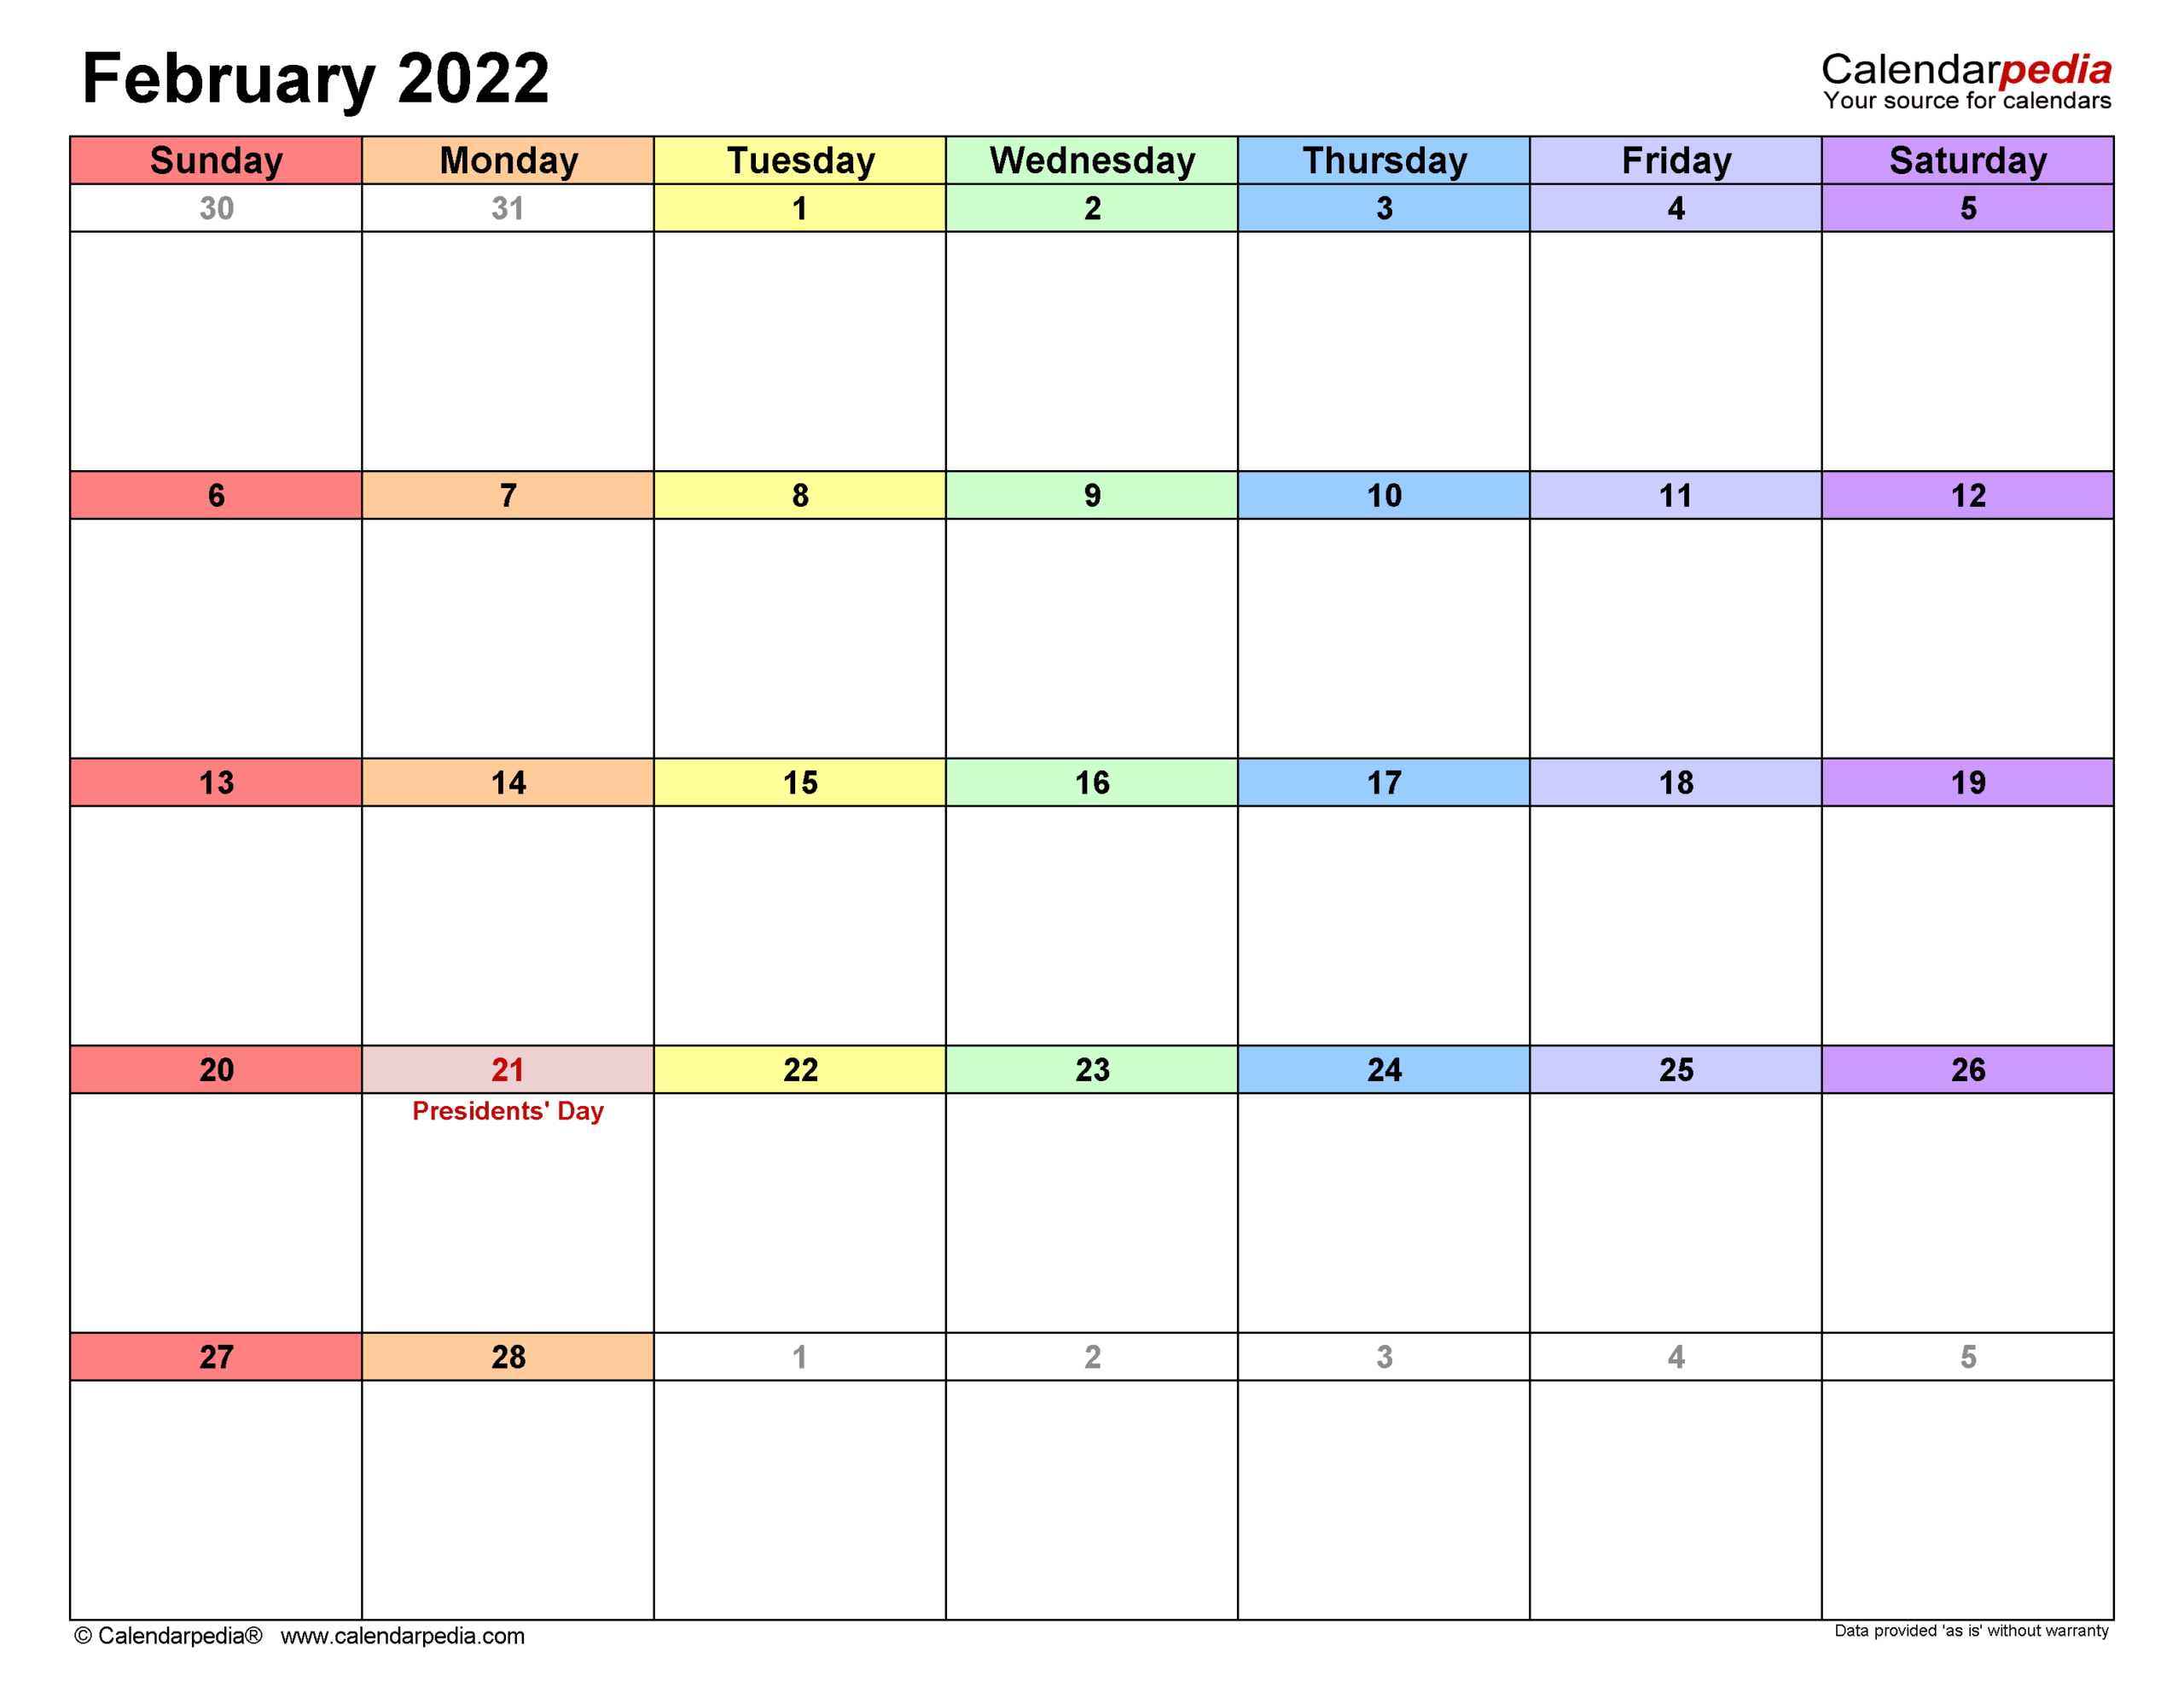 February 2022 Calendar | Templates For Word, Excel And Pdf